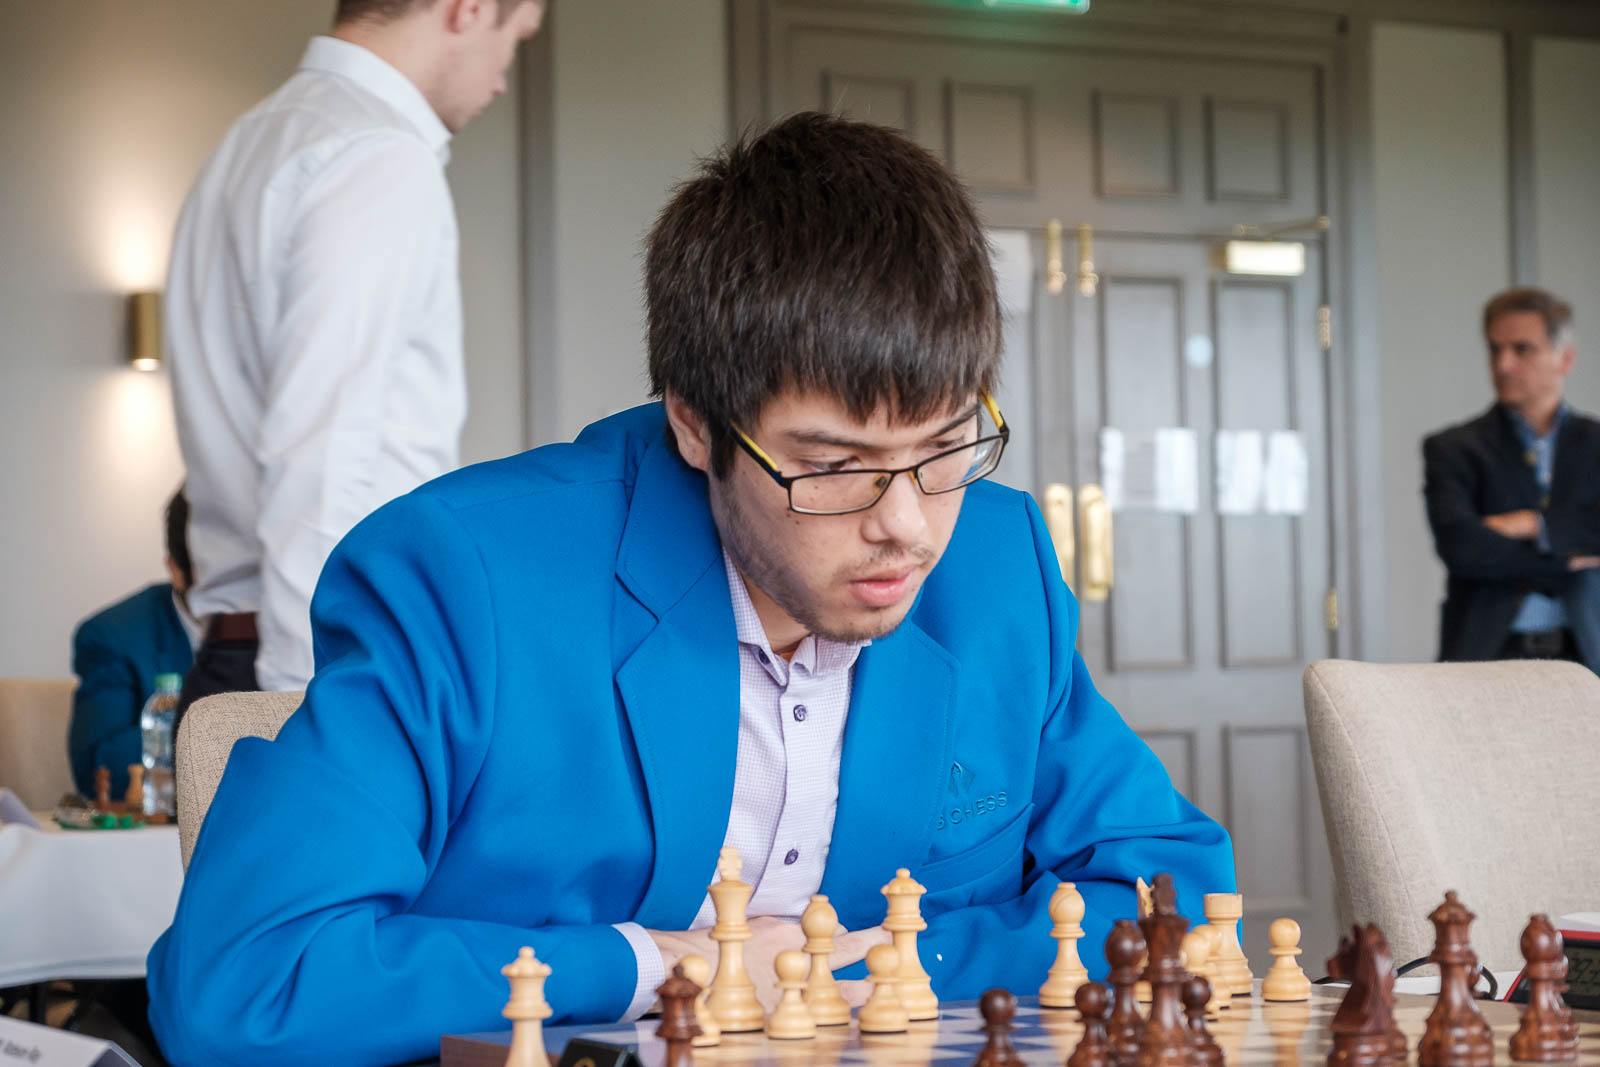 FIDE Online Olympiad, TOP Division Day 1